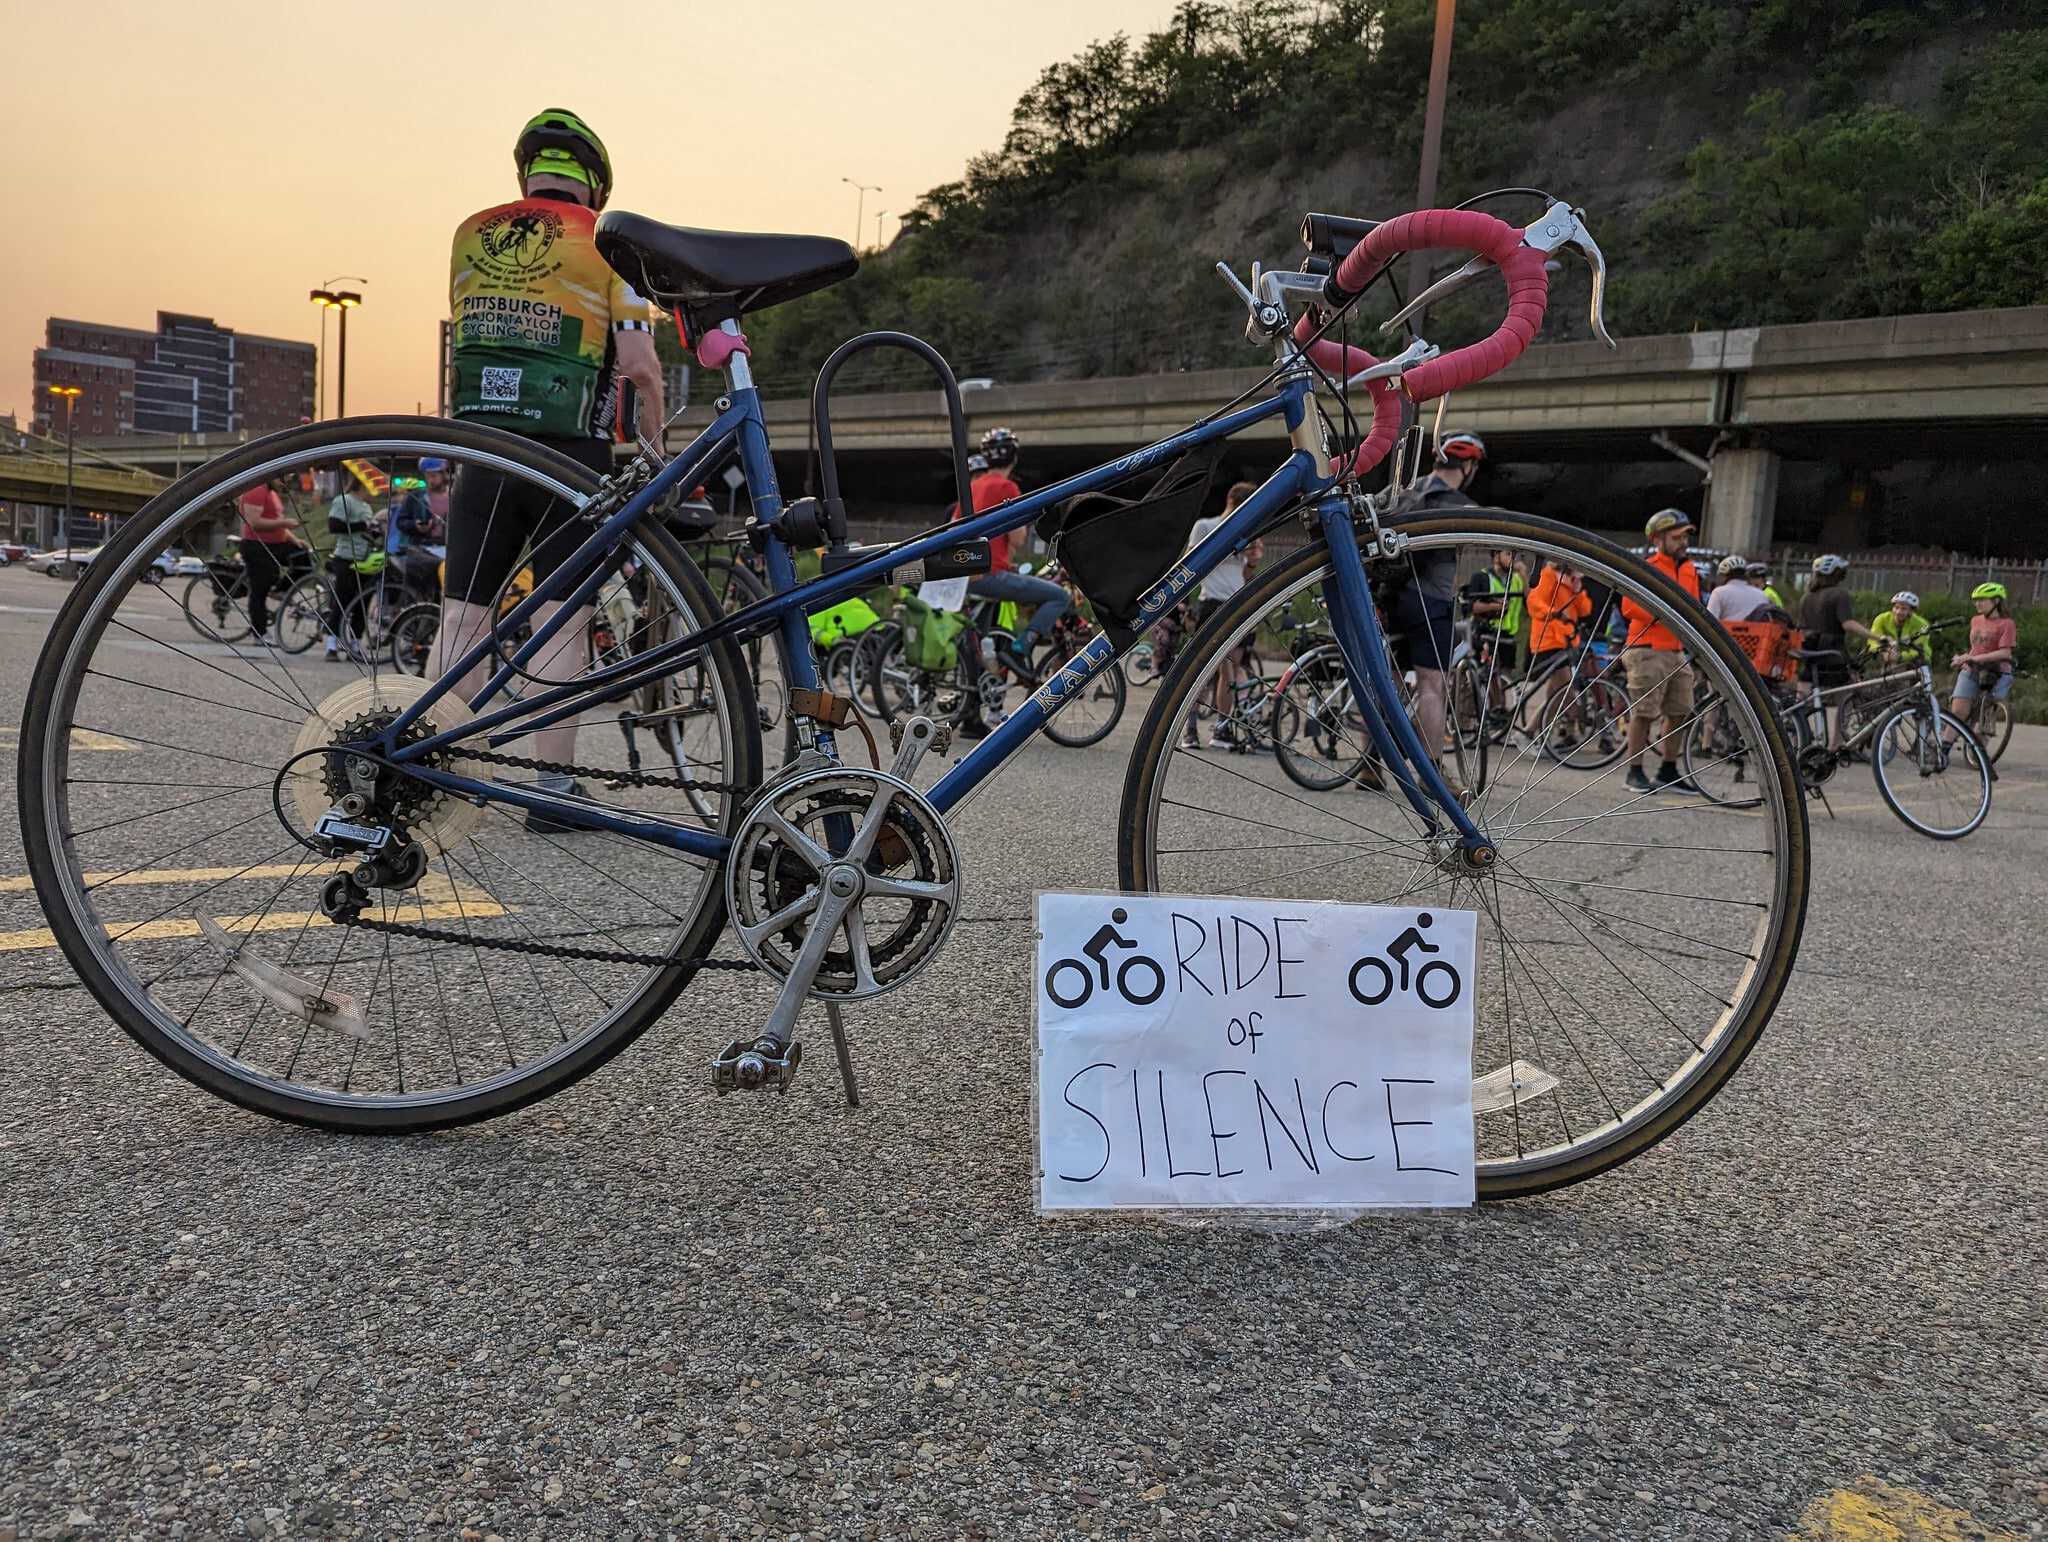 Picture of a blue bike with pink handle bars propped up on a kickstand with a sign leaning on it that says "Ride of Silence" with bike icons on it. The sun is setting in the background with other cyclists in the mid ground.